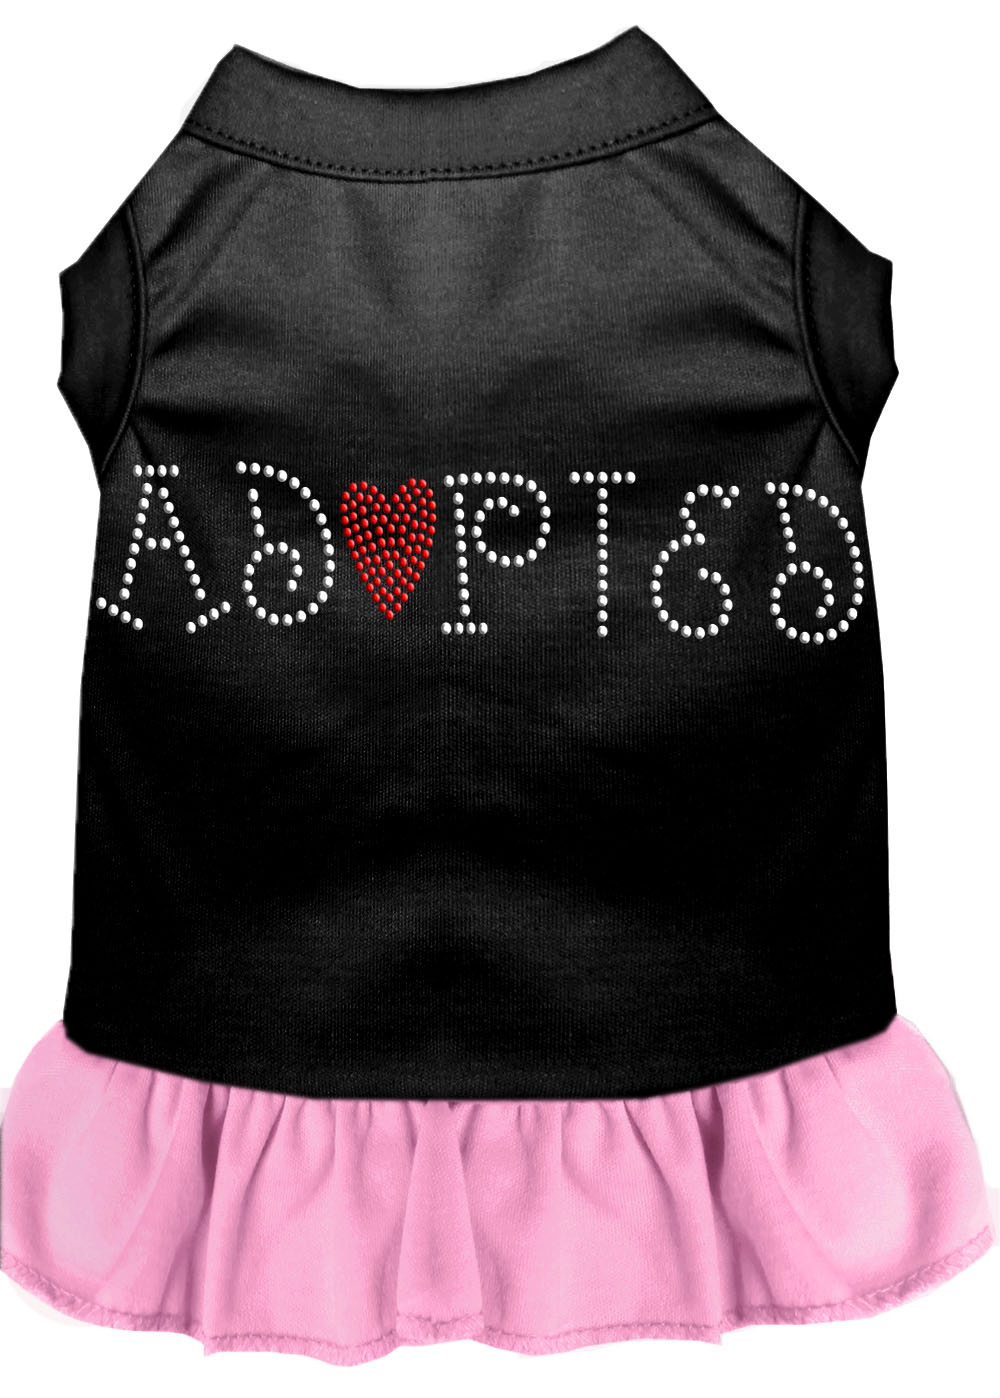 Adopted Rhinestone Dresses Black with Light Pink XL